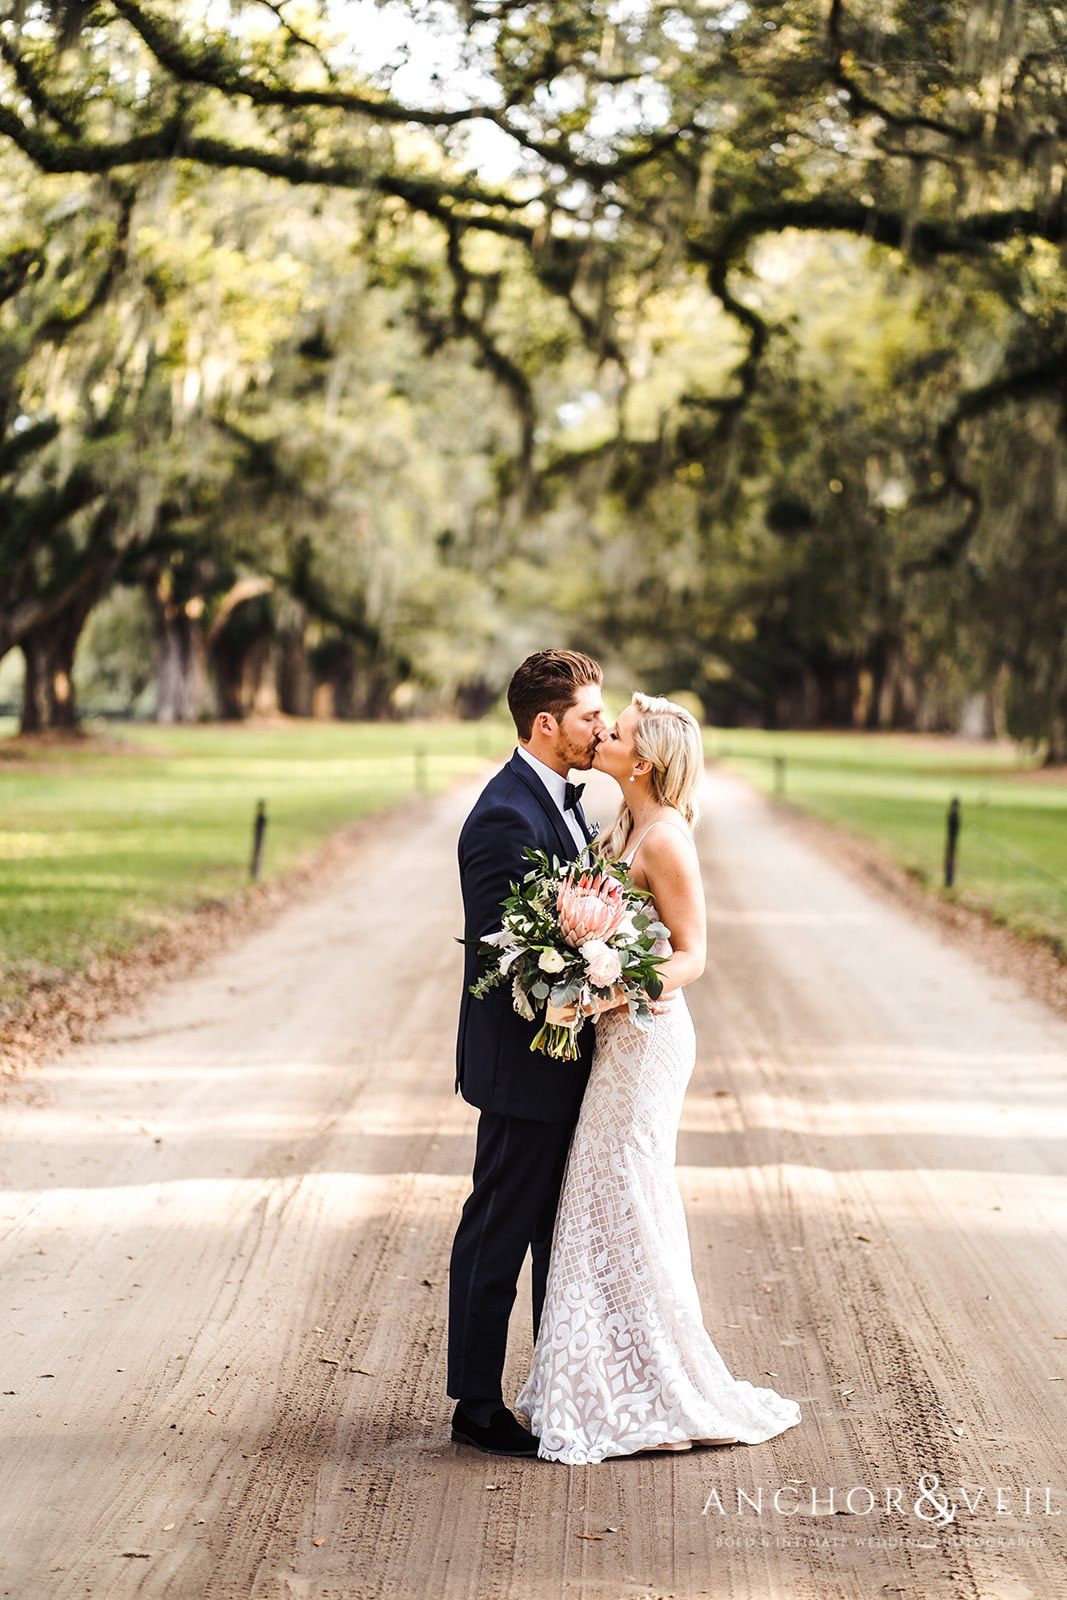 The bride and groom on the grounds at the Boone Hall Plantation Wedding 